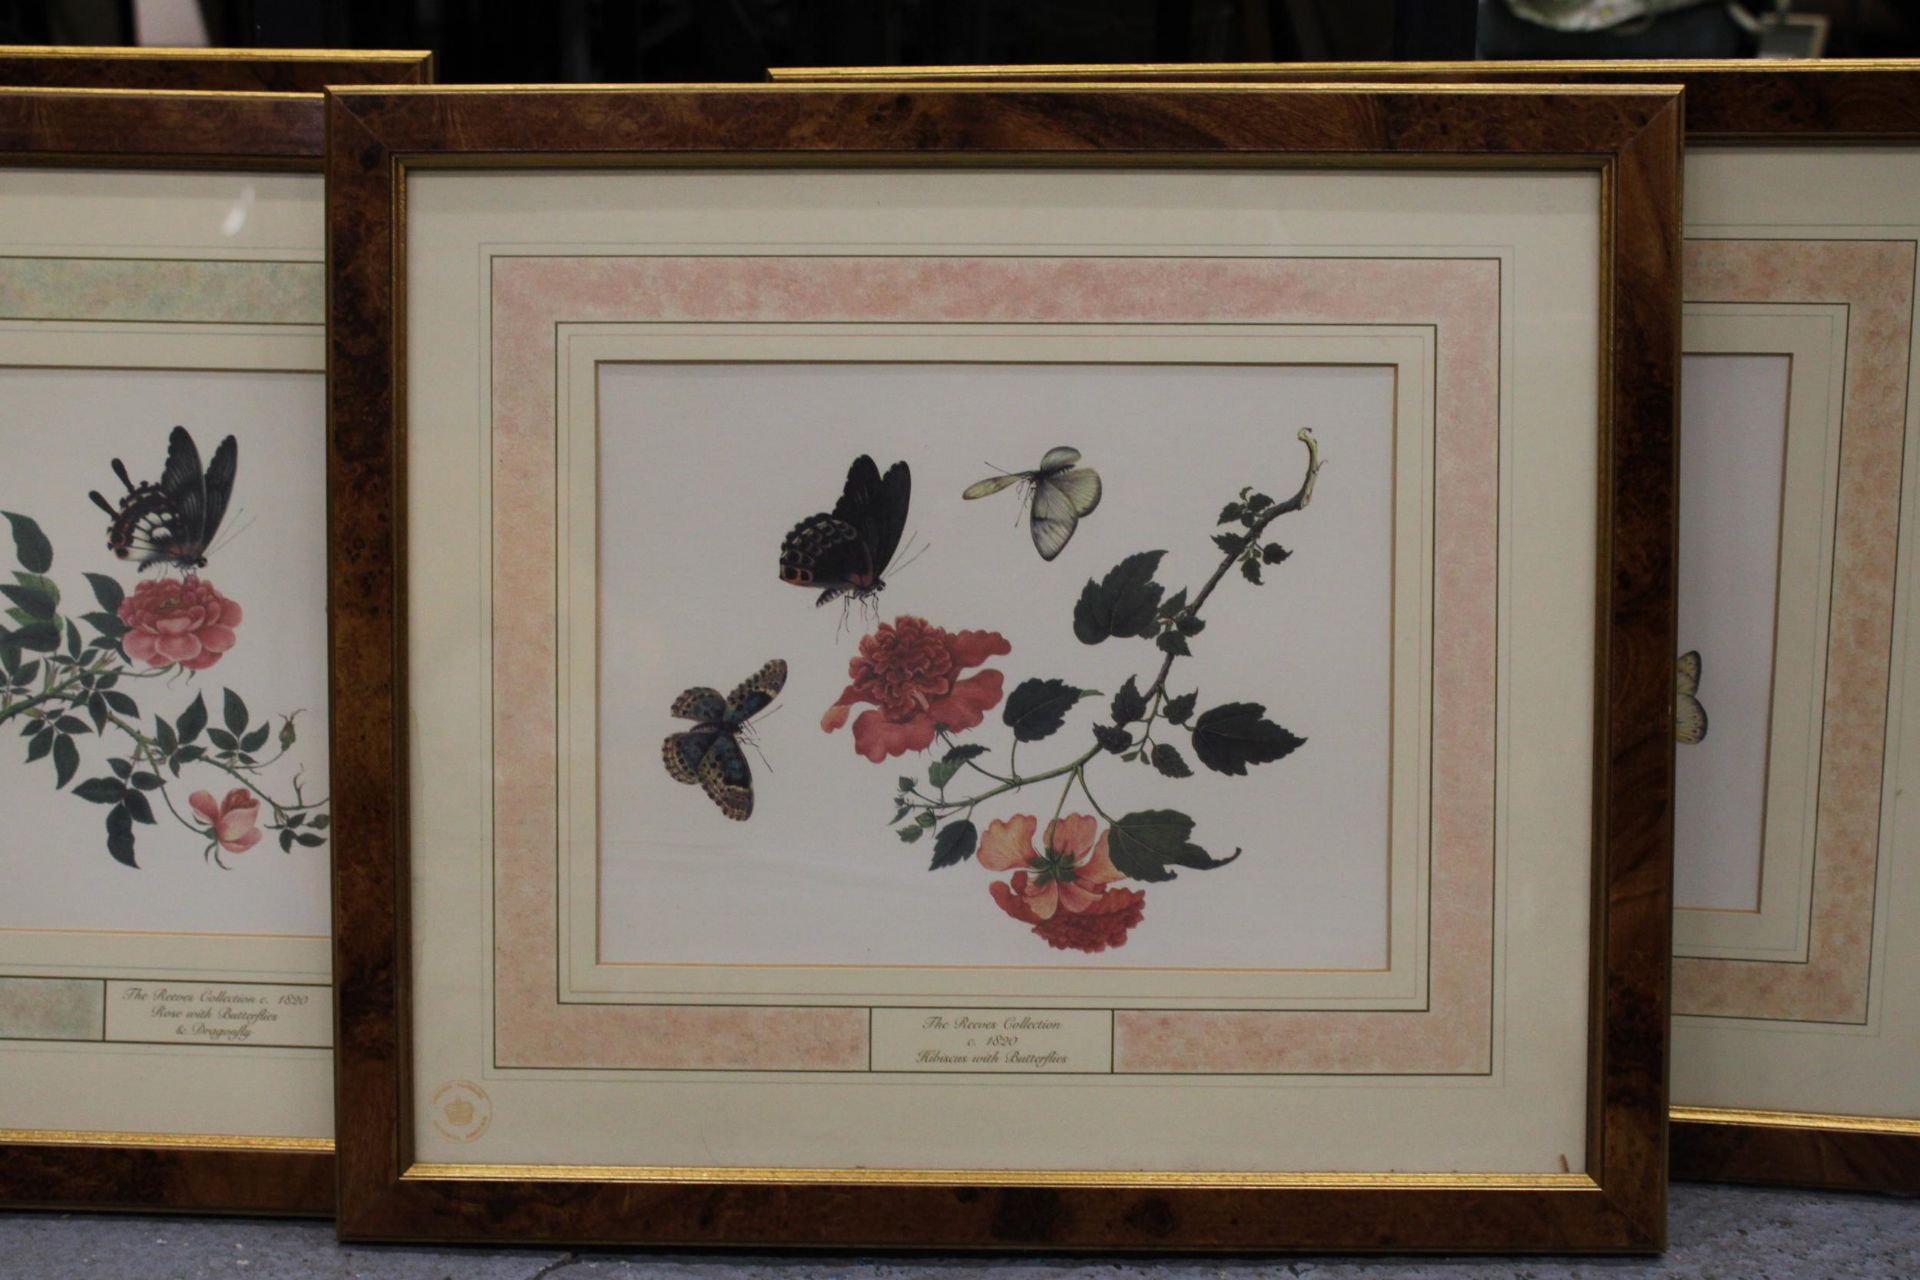 A SET OF FOUR "THE REEVES COLLECTION" FEATURING BUTTERFLIES AND VARIOUS FLOWERS - Image 2 of 3